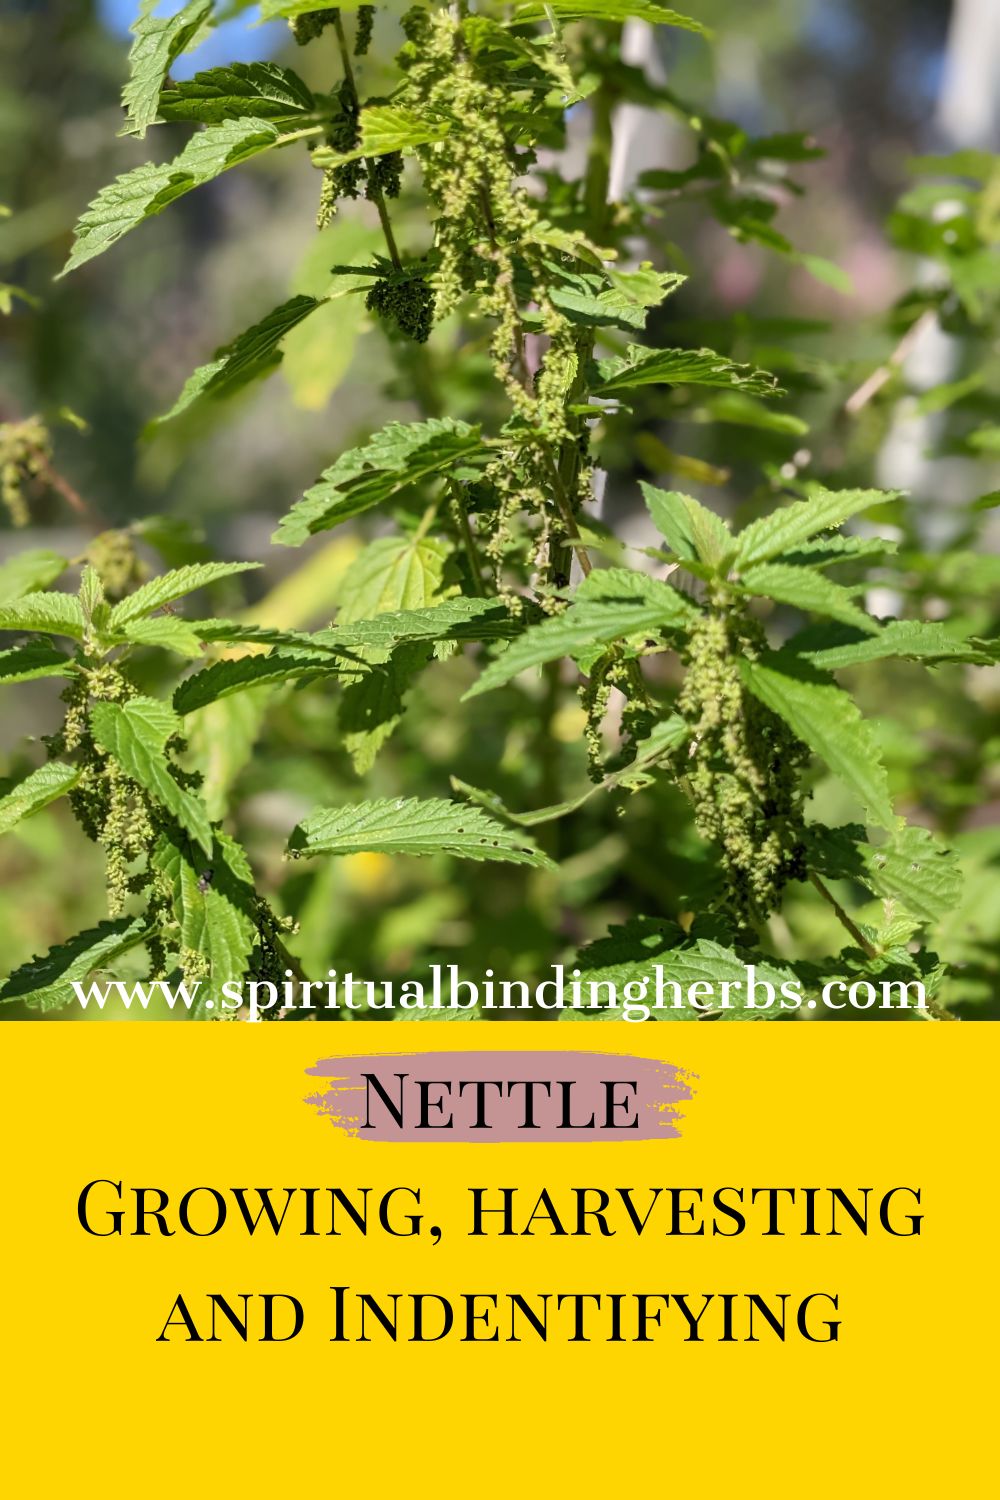 Nettle – Identification, Growing, Harvesting & Parts Used